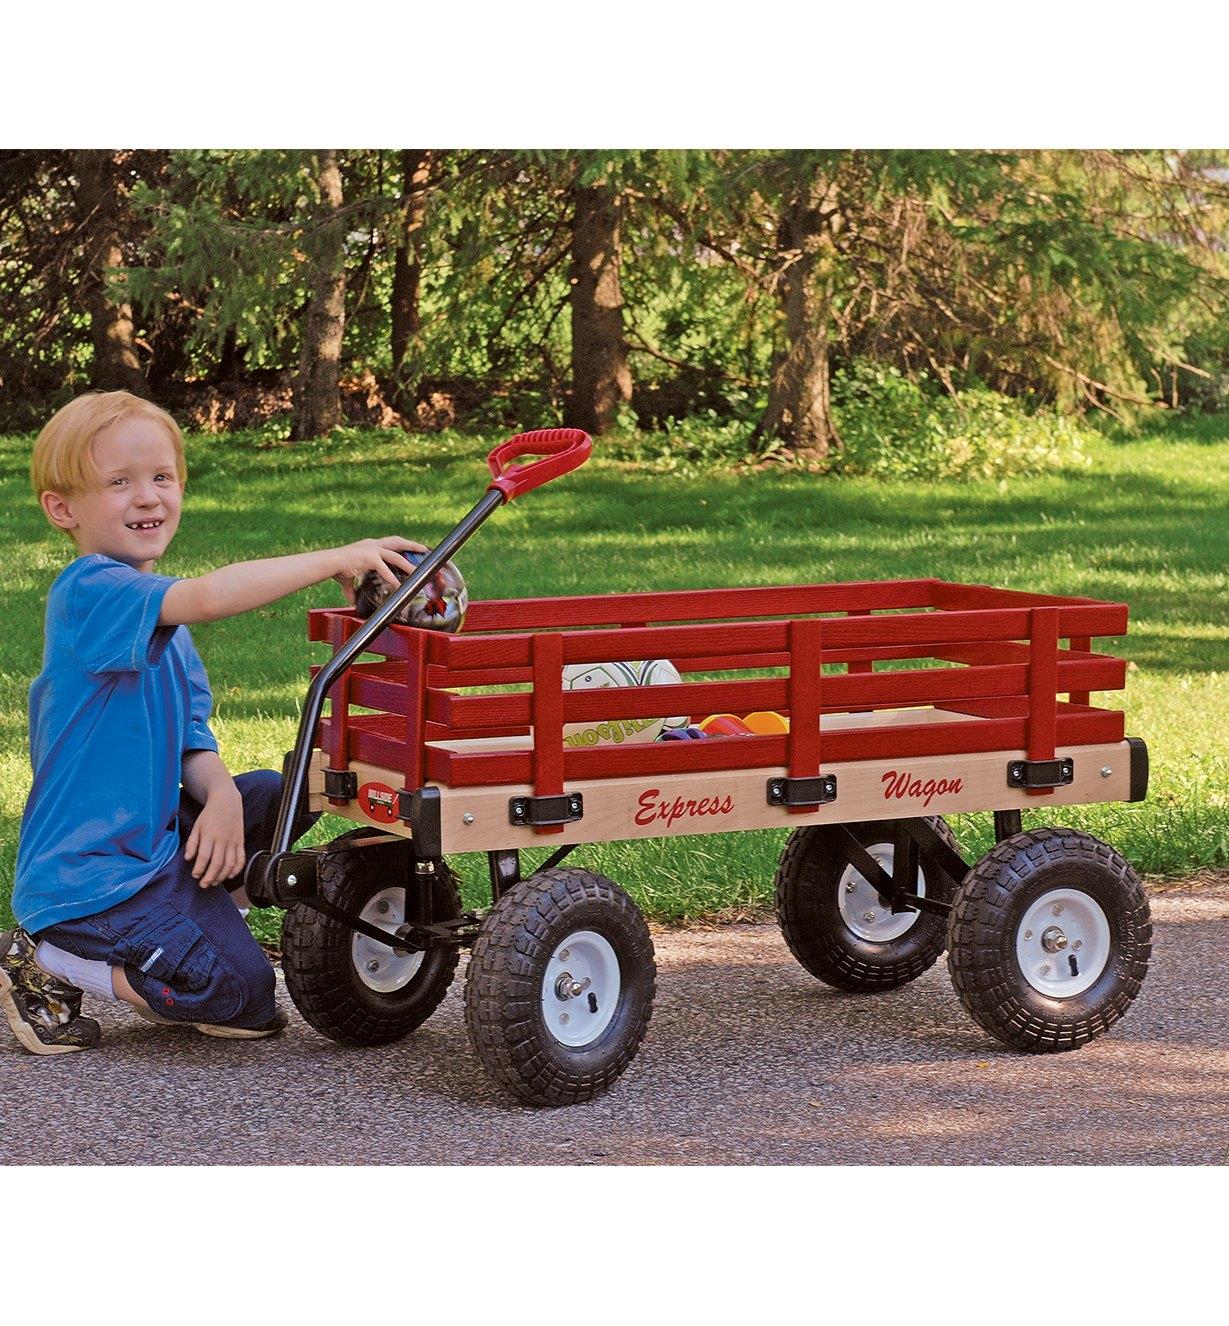 A boy places balls in the All-Season Convertible Wagon with wheels on